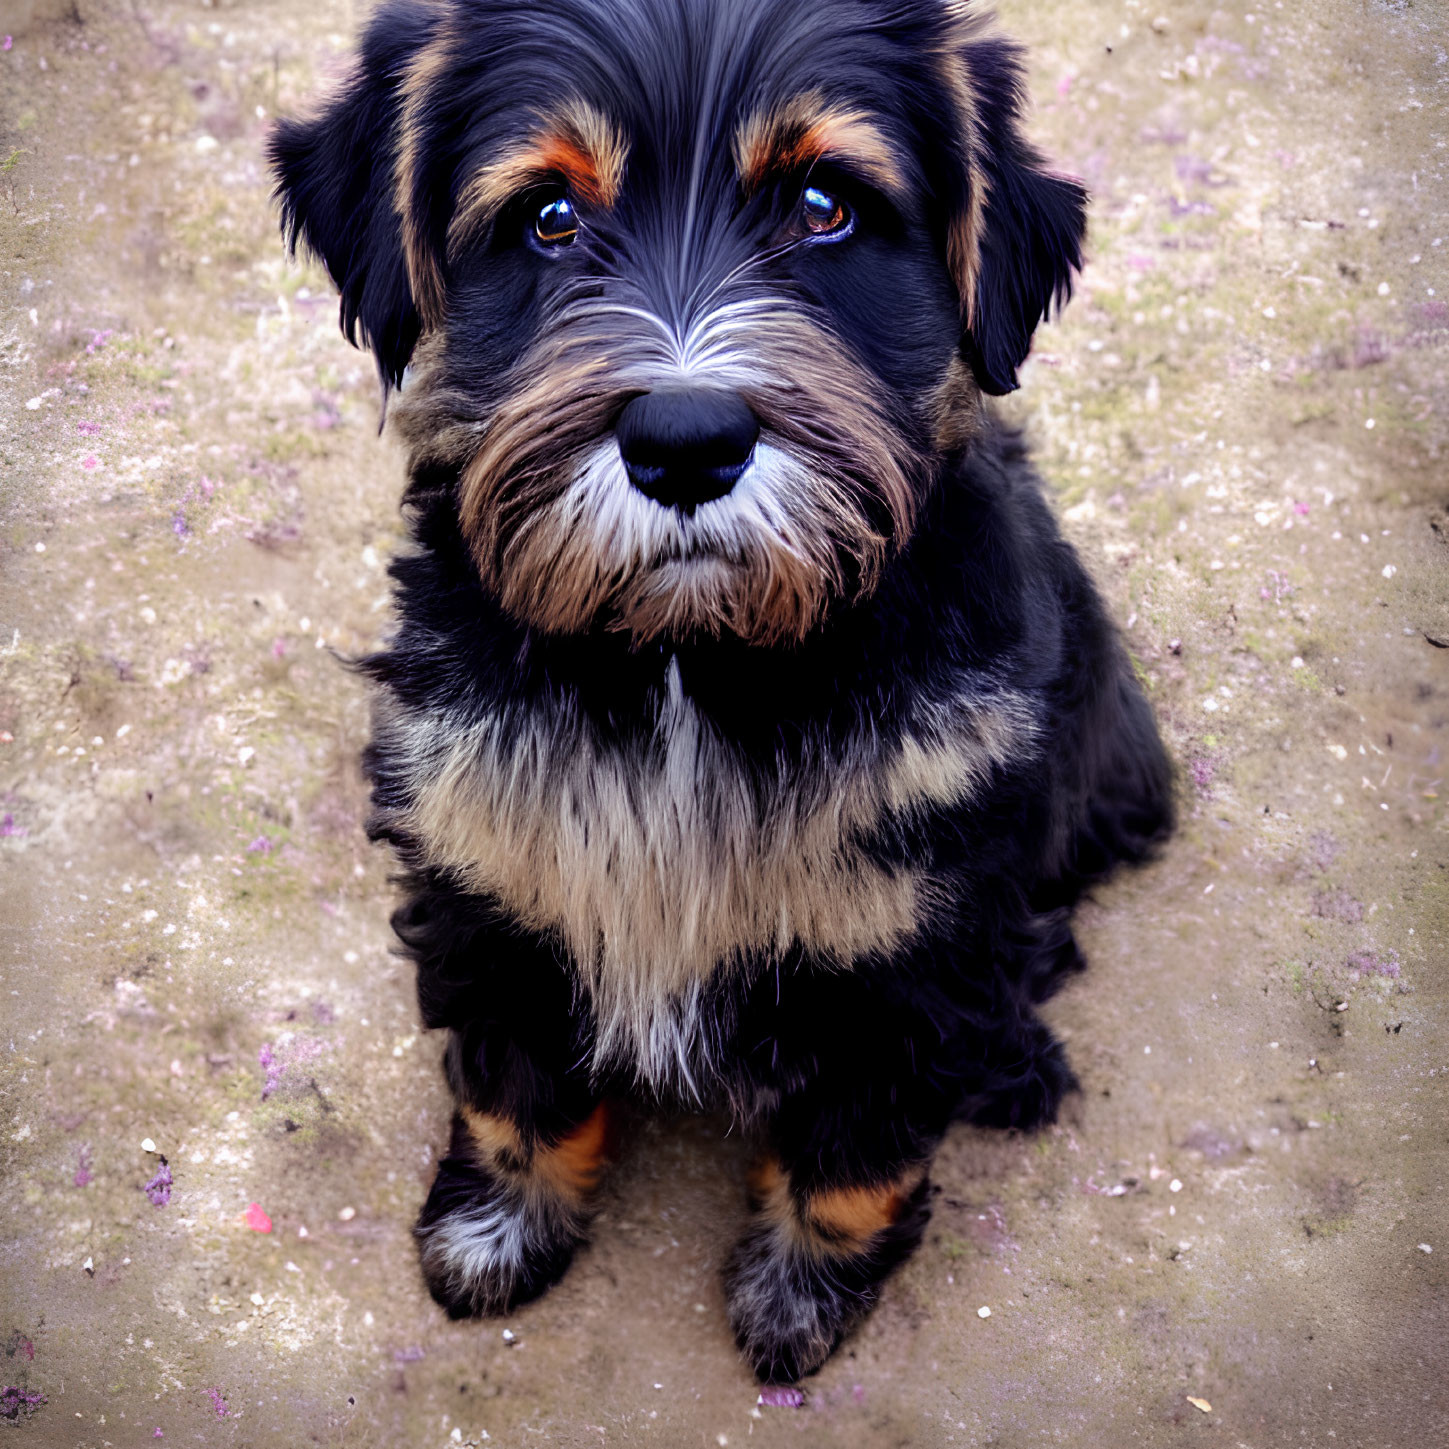 Fluffy Black and Tan Dog with Expressive Eyes on Textured Ground